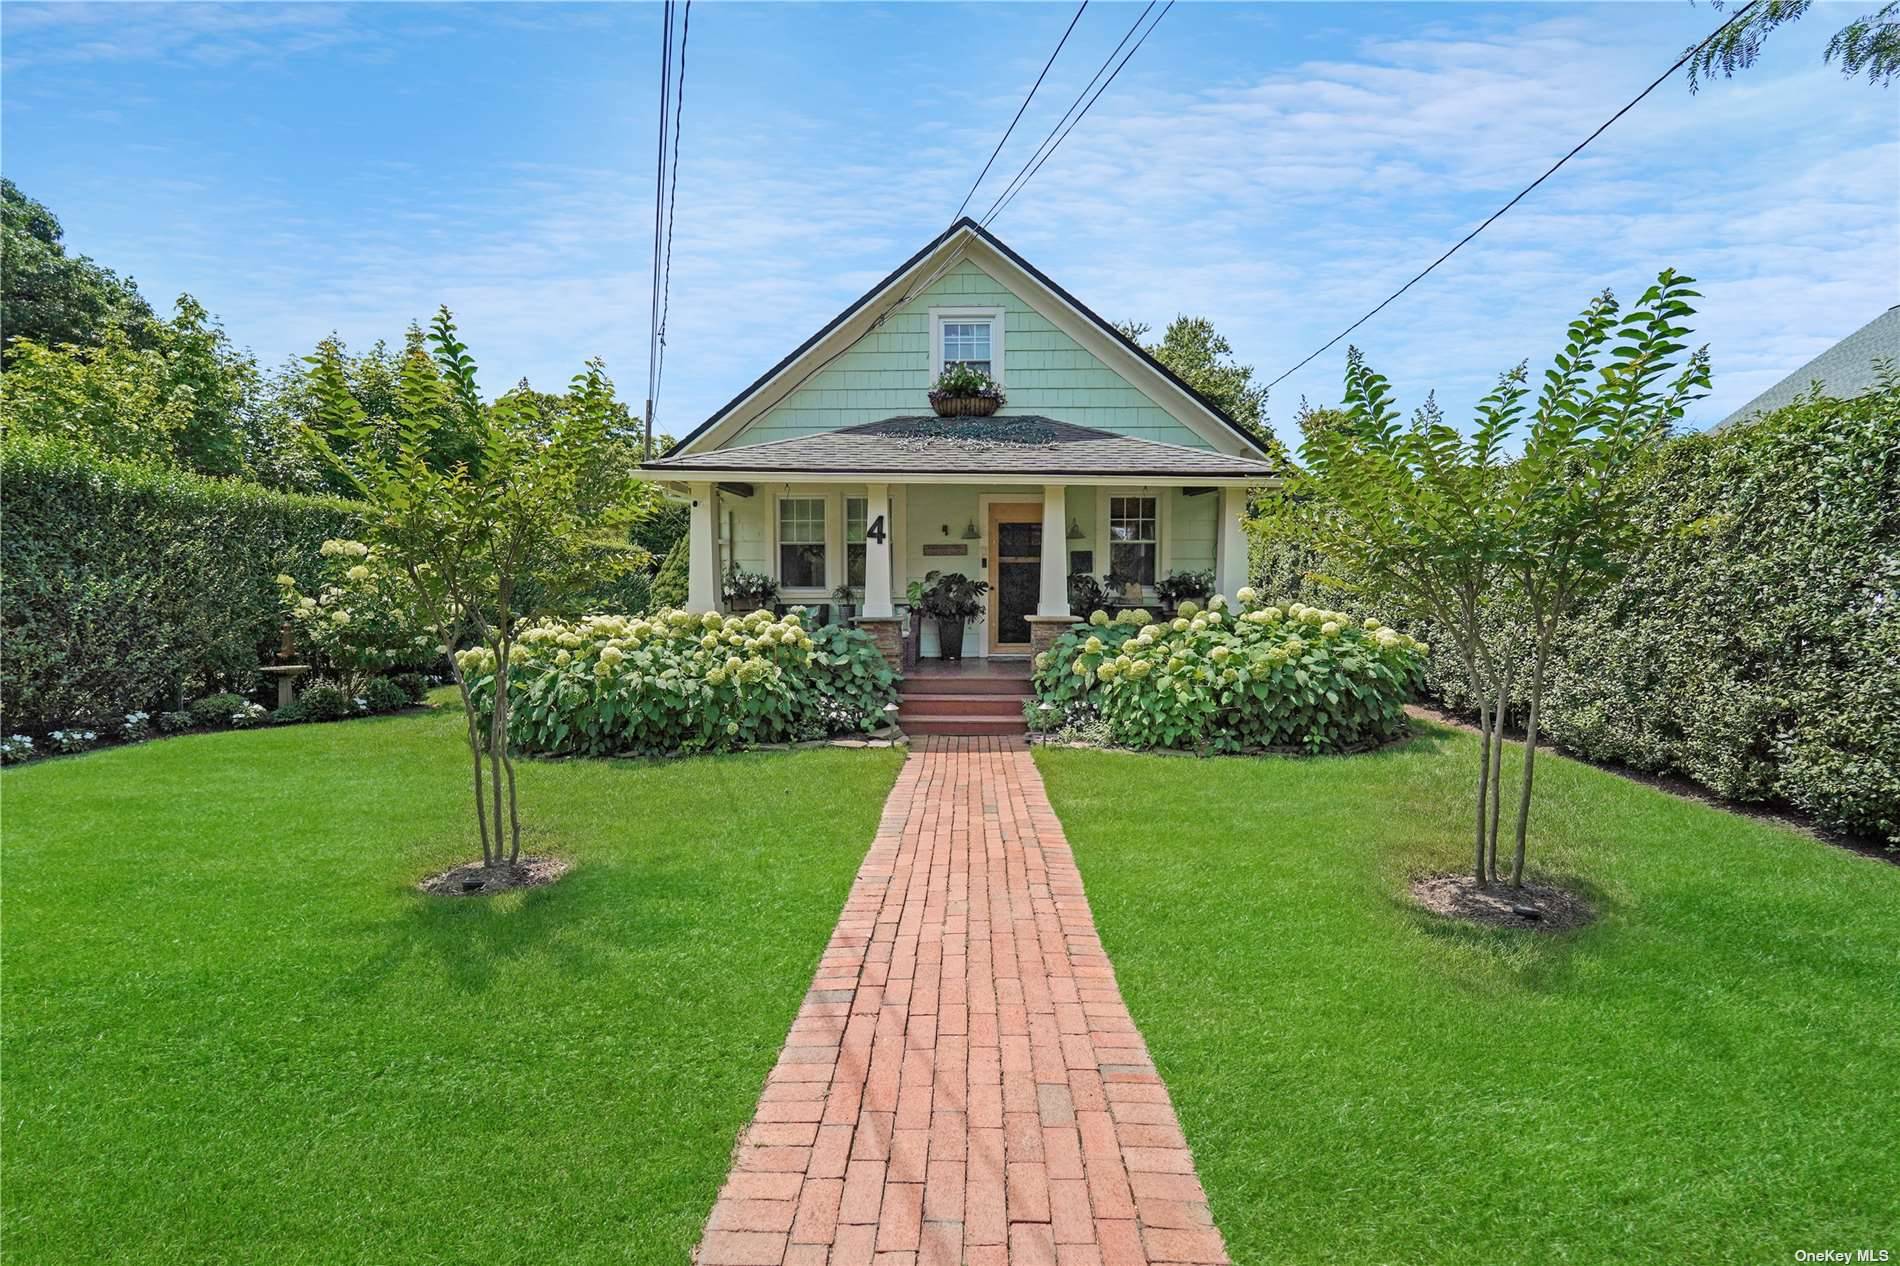 Set on meticulously landscaped grounds, this farmhouse style cottage offers a picturesque exterior and a beautifully renovated interior with modern amenities abound.